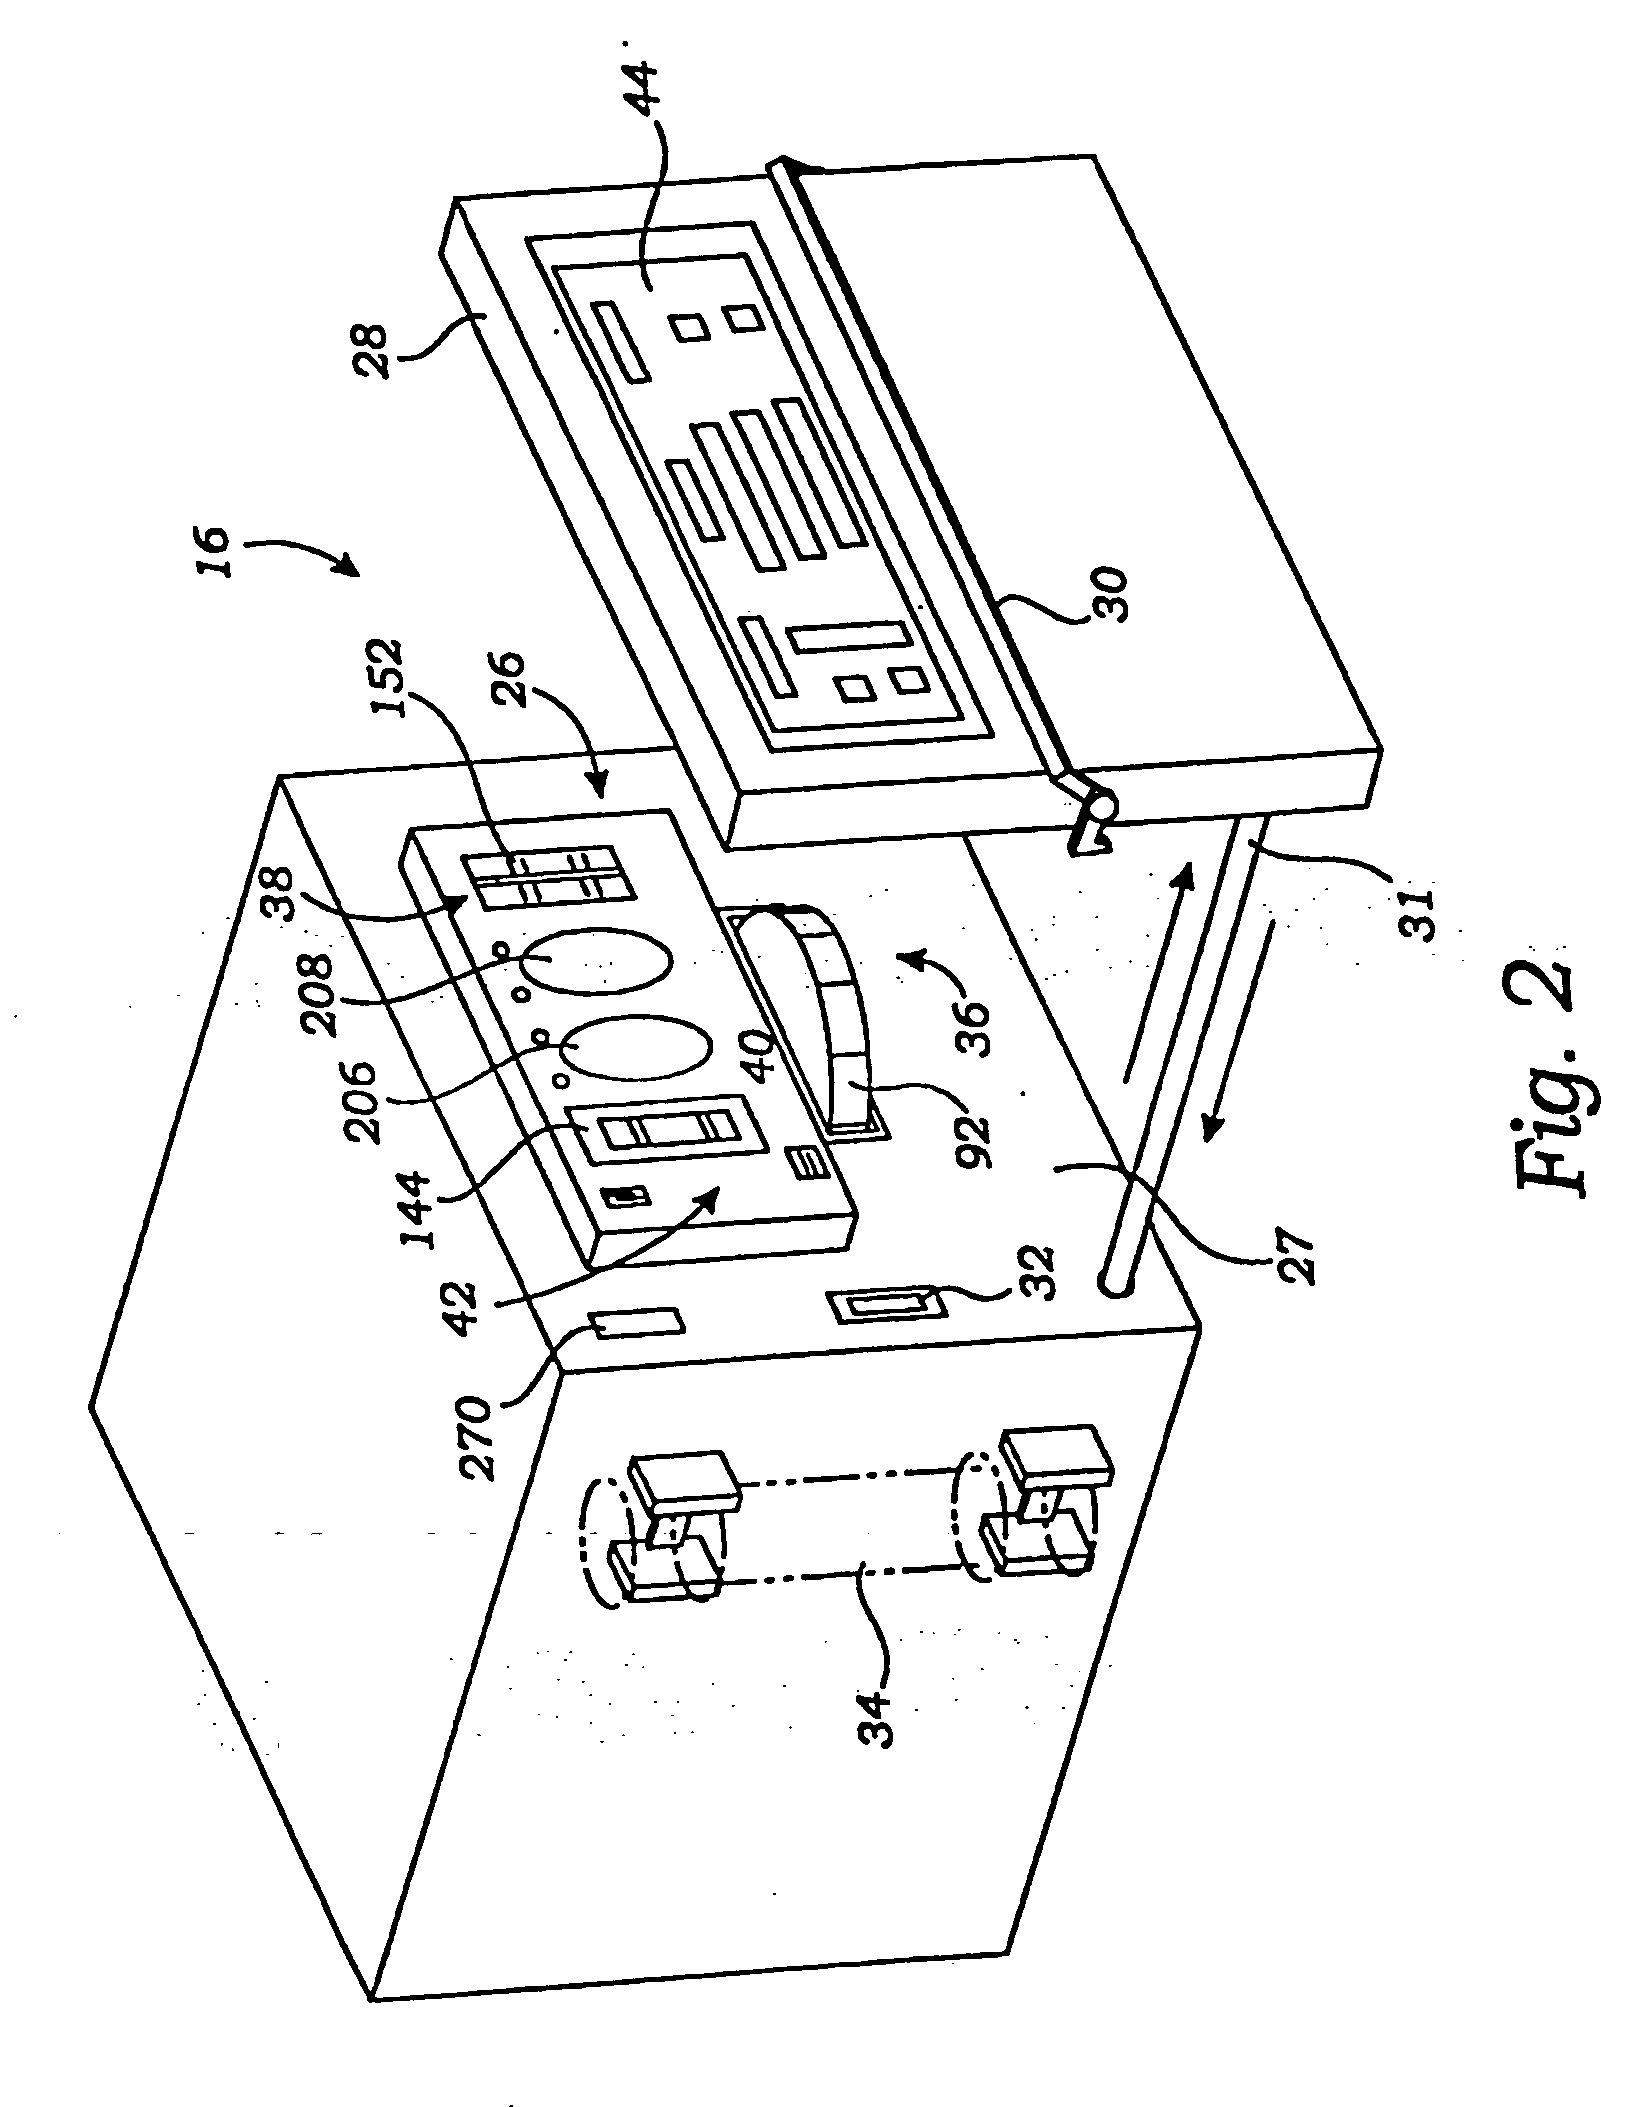 Blood treatment cartridge and blood processing machine with slot